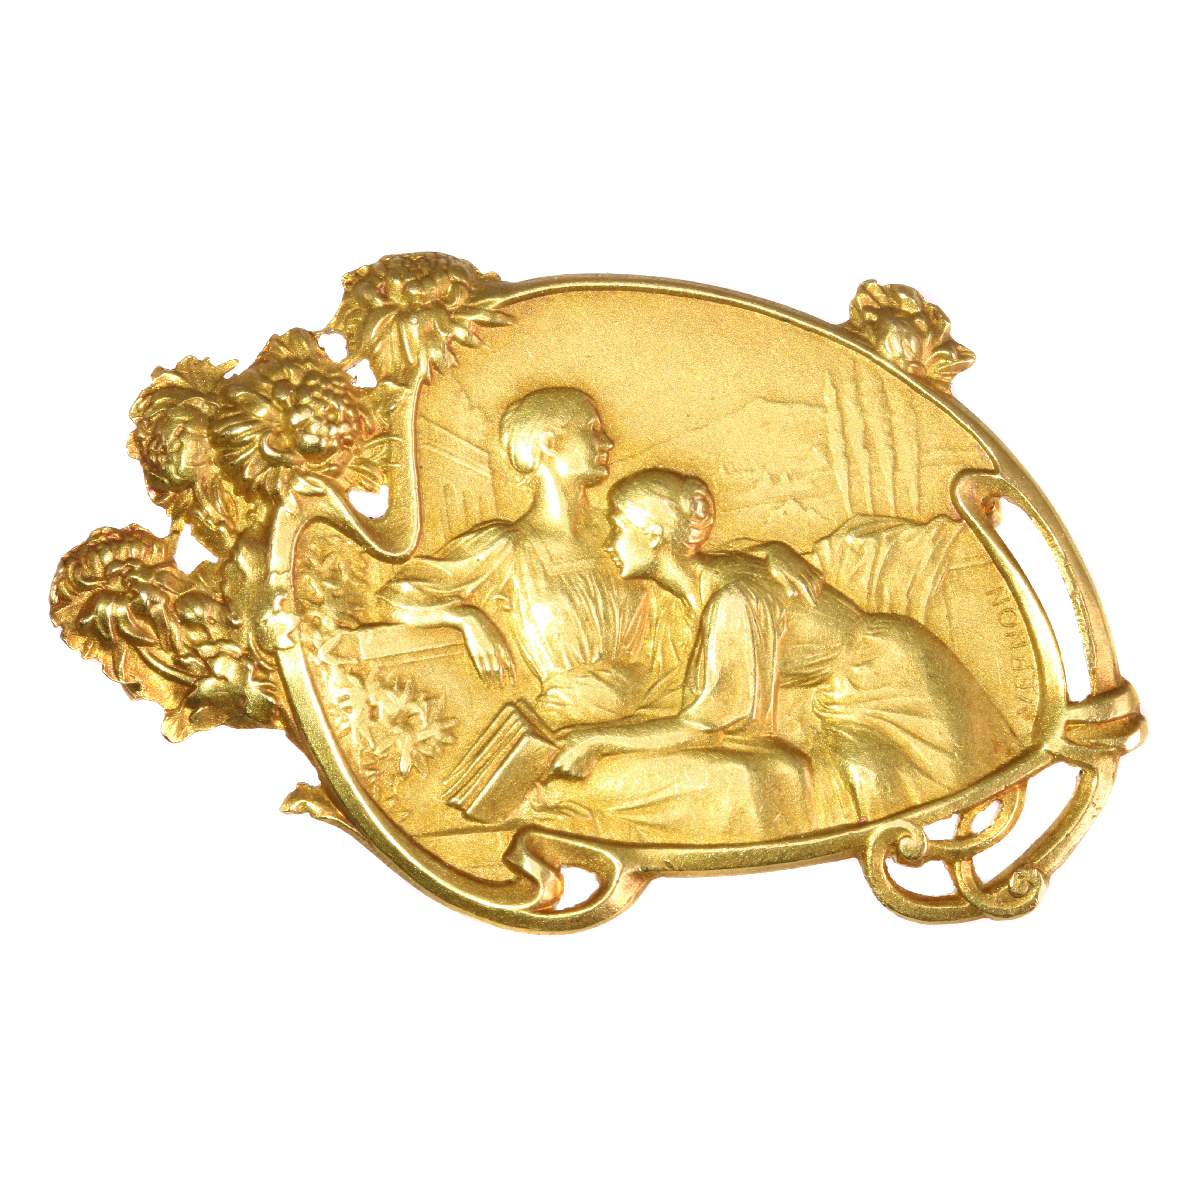 Art Nouveau brooch signed Vernon depicting friendship between two women